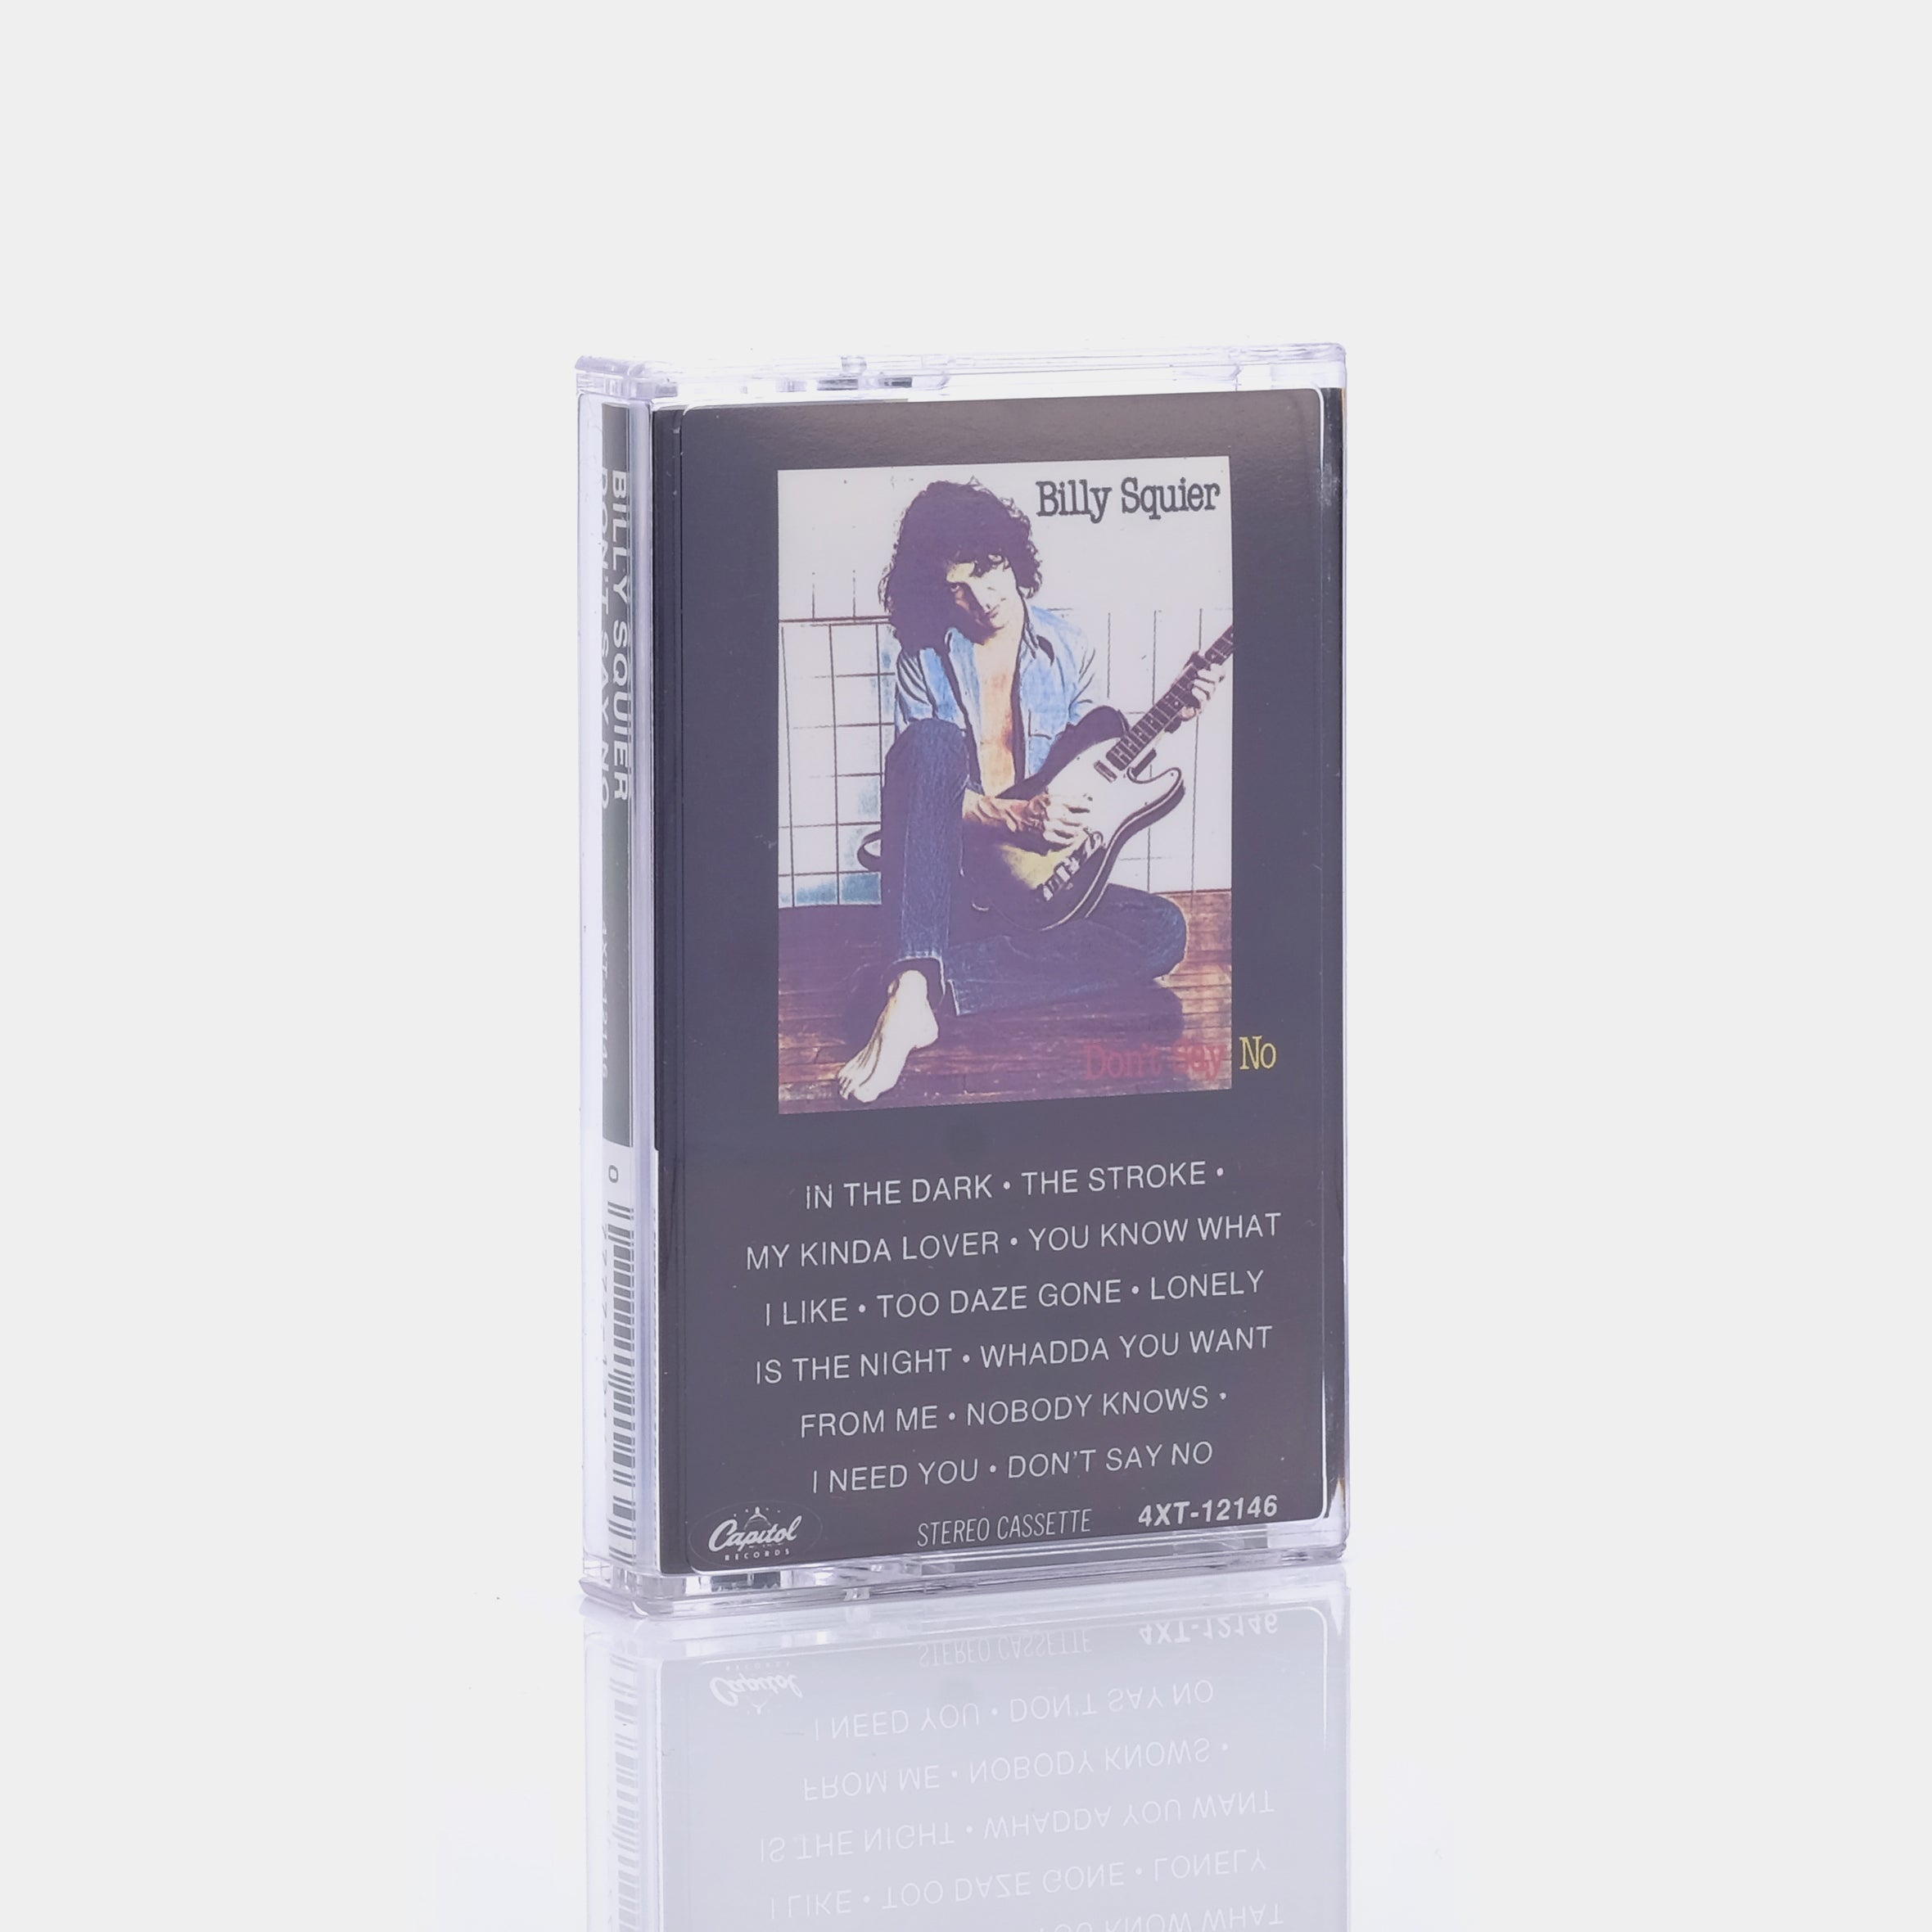 Billy Squier - Don't Say No Cassette Tape